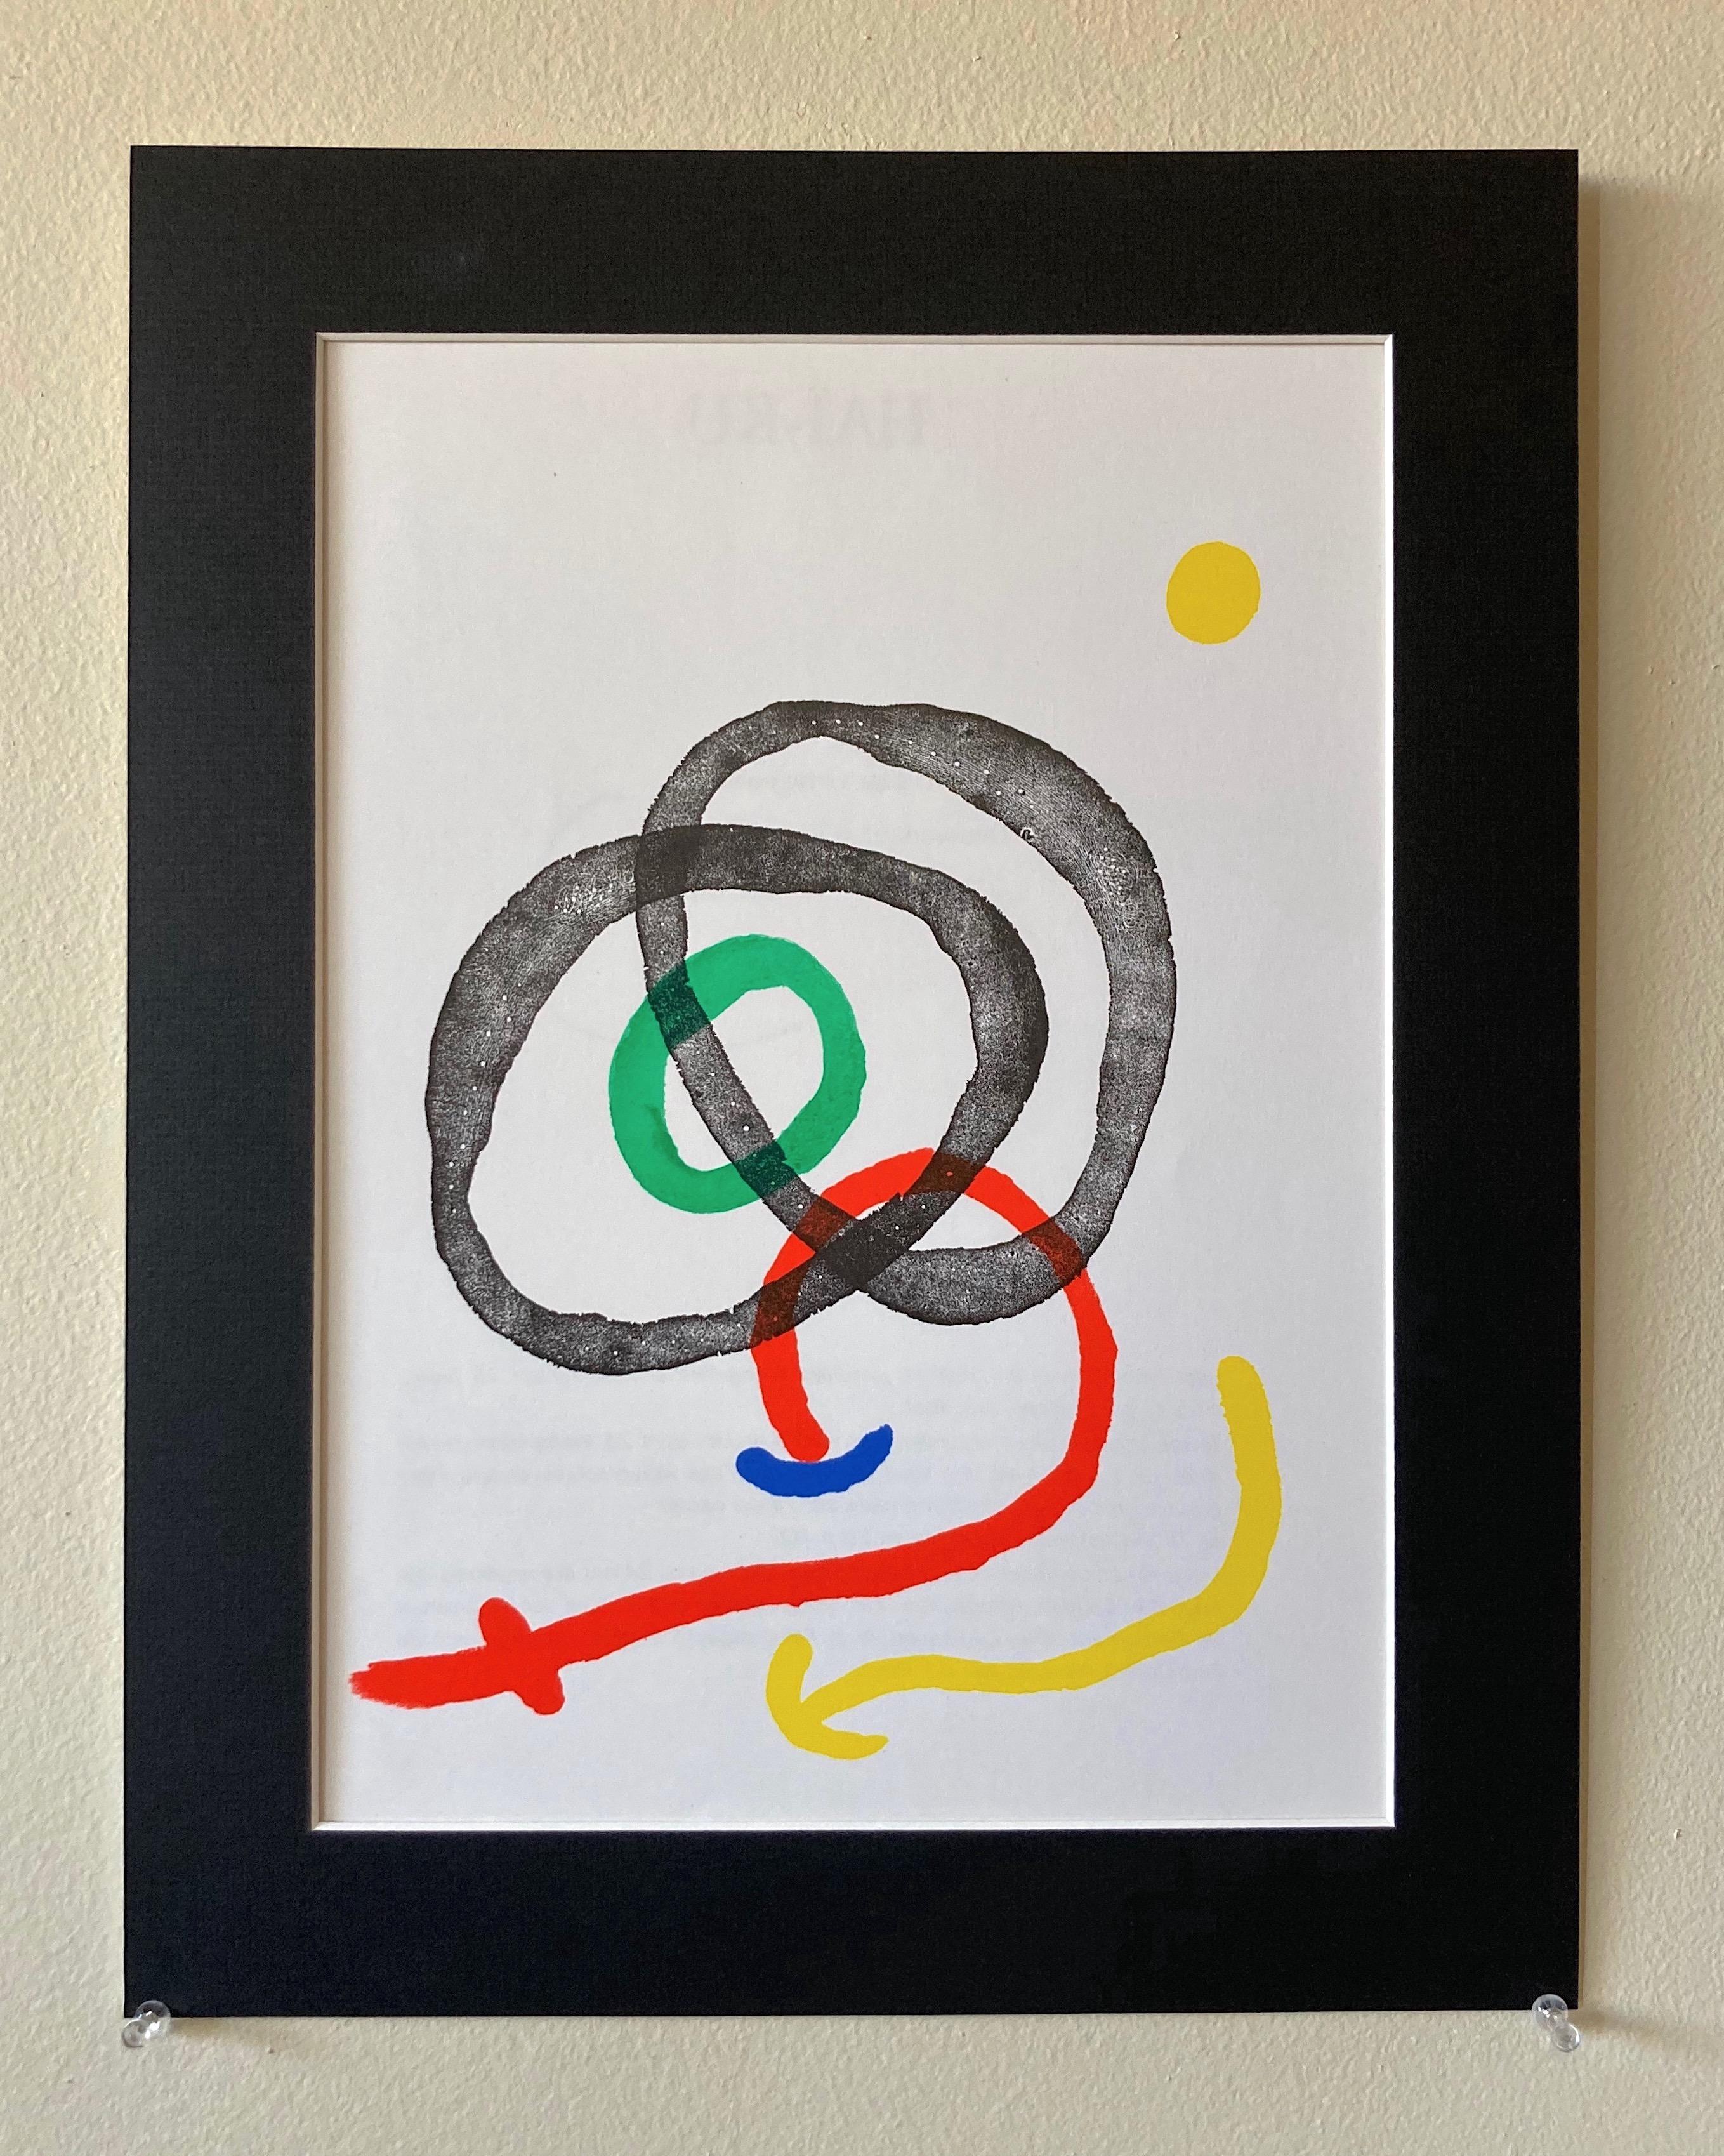 A Joan Miró (Spanish, 1893-1983) color lithograph printed by Maeght, Paris; published by Derrière Le Miroir, Paris, No. 169 in 1967. Very good condition and impression with text on verso, as issued. Mounted in a black archival book/window mat,